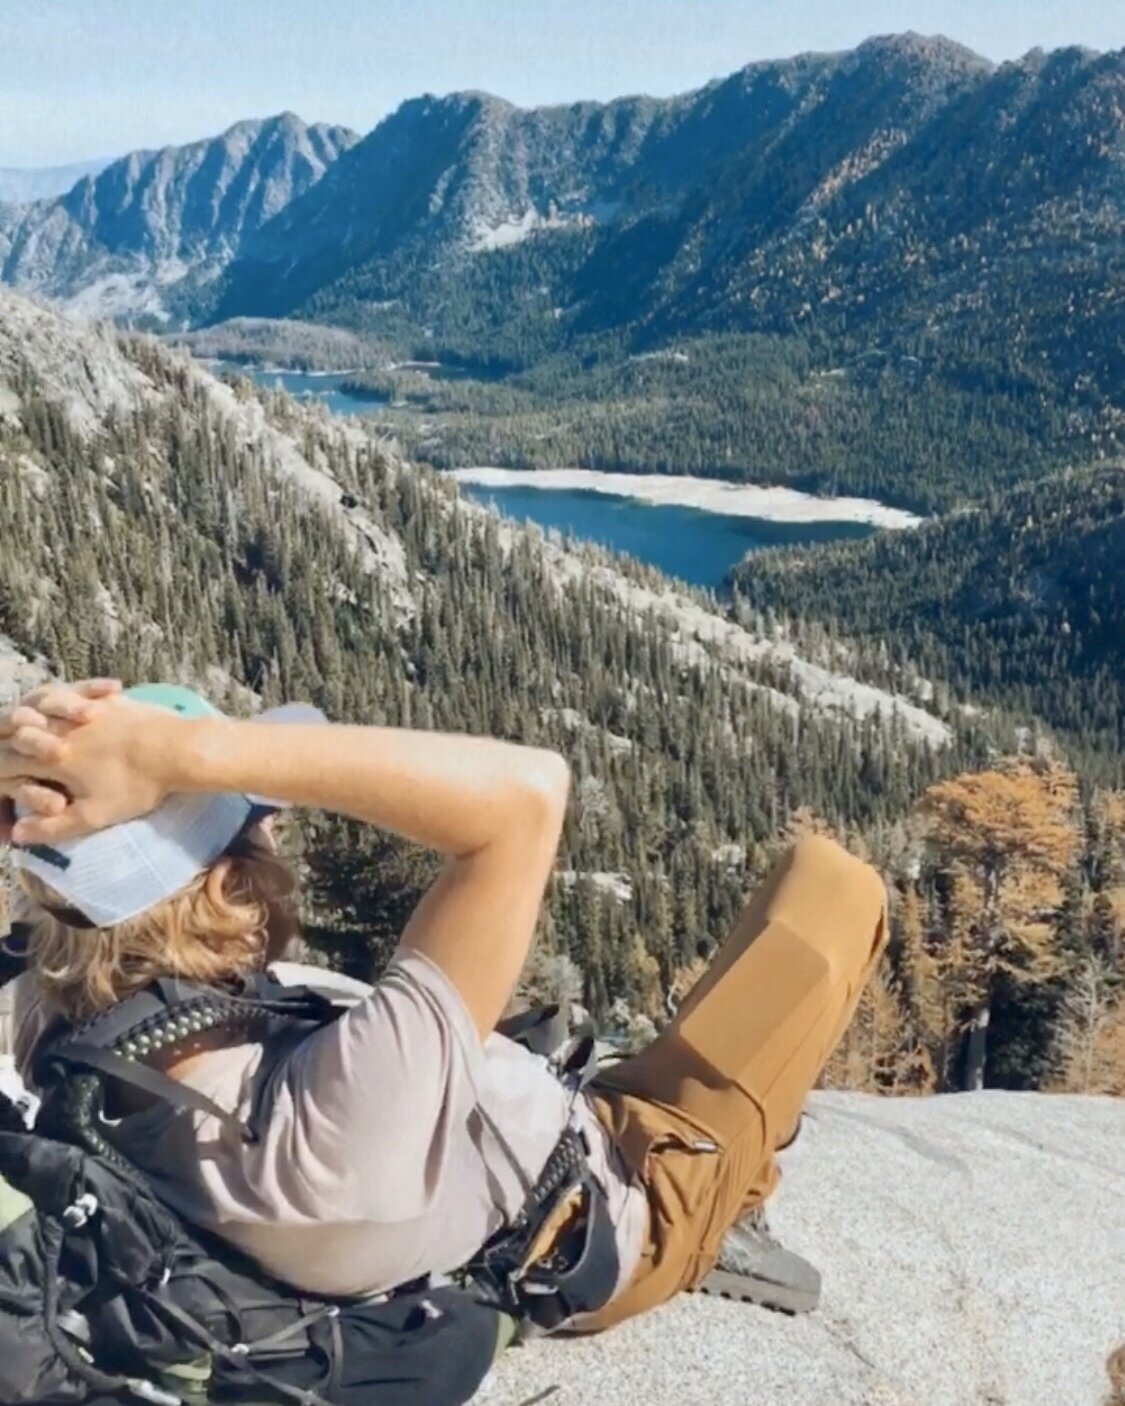 Once we reached this view point above Snow Lakes the cameras never came back out. This is a screen shot from a story video I took - sorry for the poor quality!